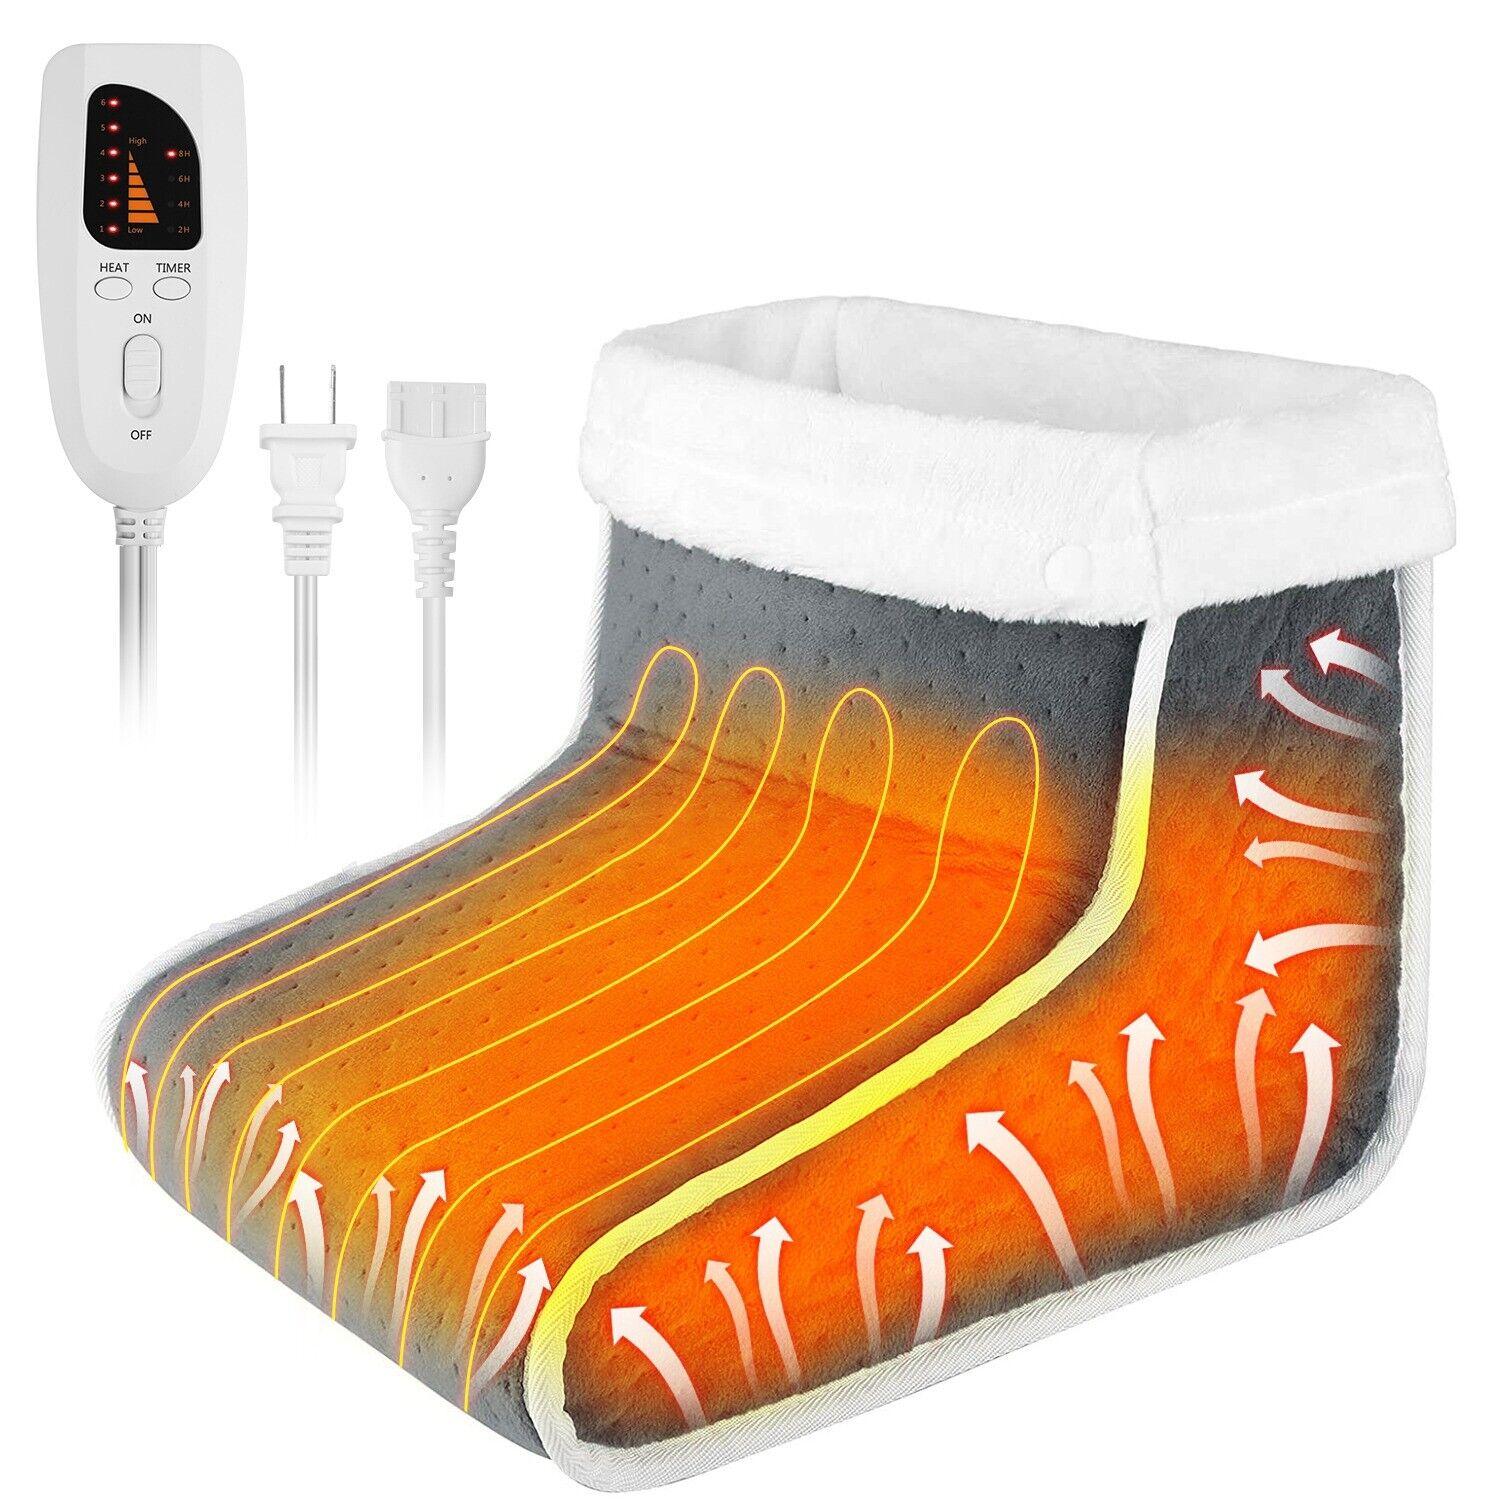 Electric Heated Foot Warmer Washable Heating Pad Boots For Winter Warm Feet - TheGivenGet